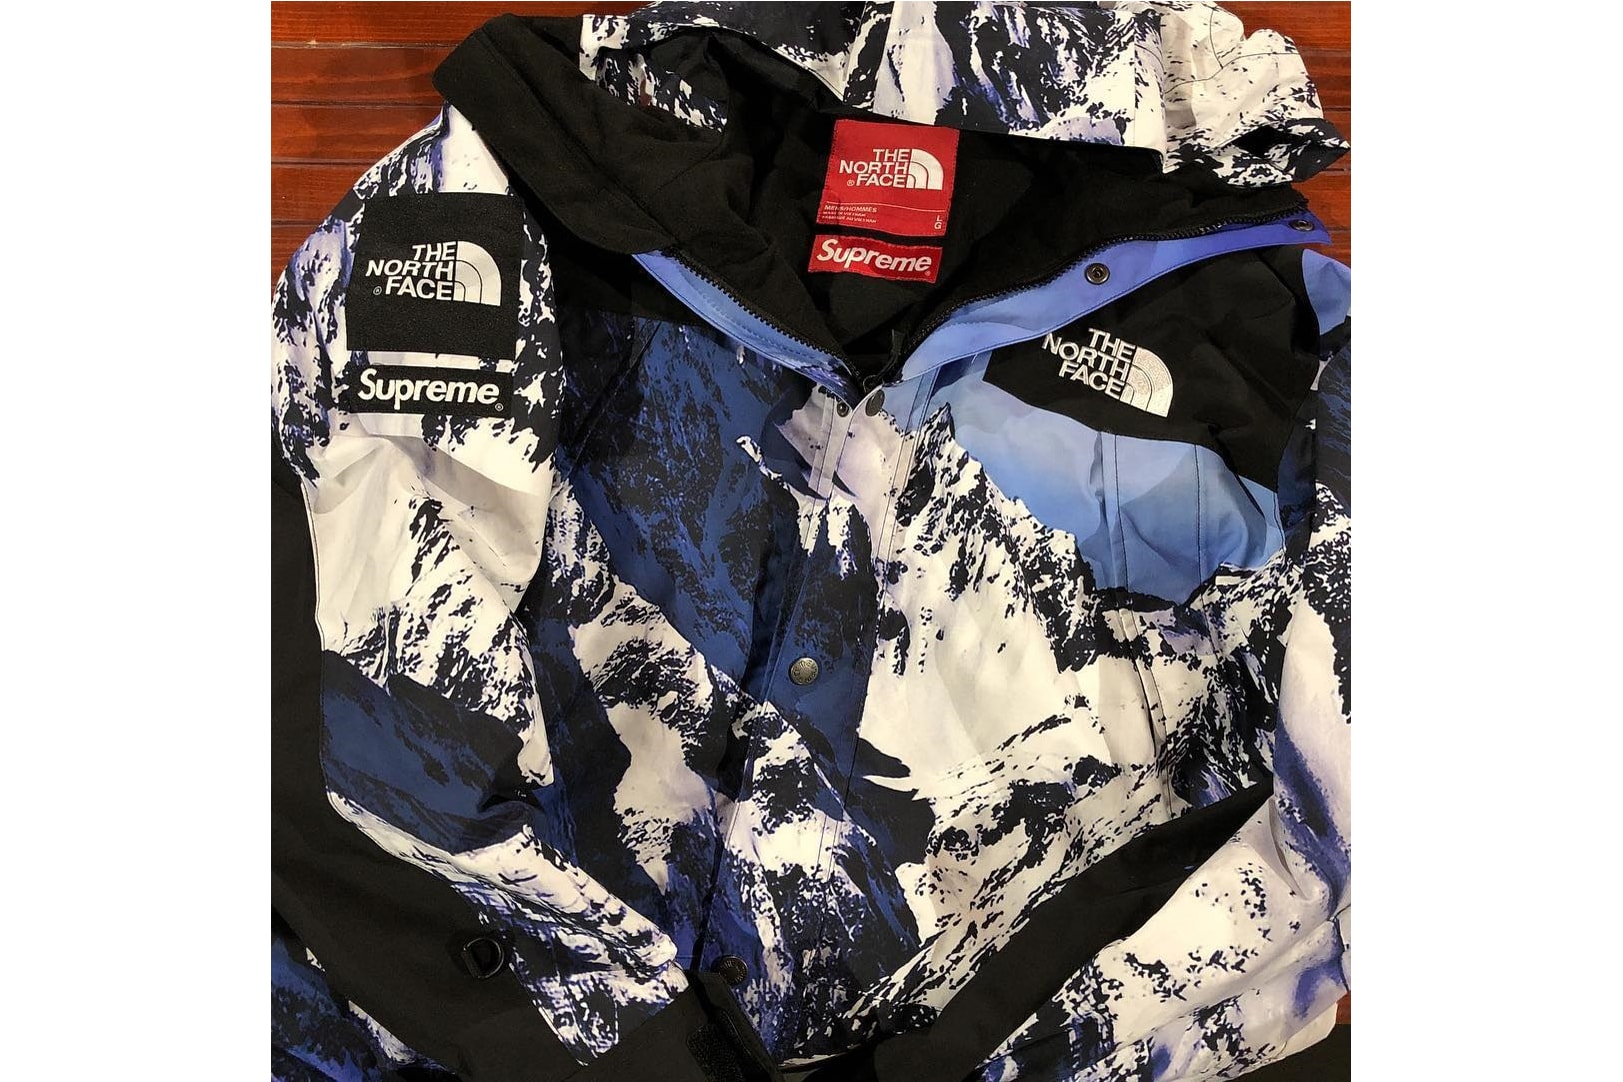 Round Two 提前發售尚未發佈的 Supreme x The North Face 聯名外套？